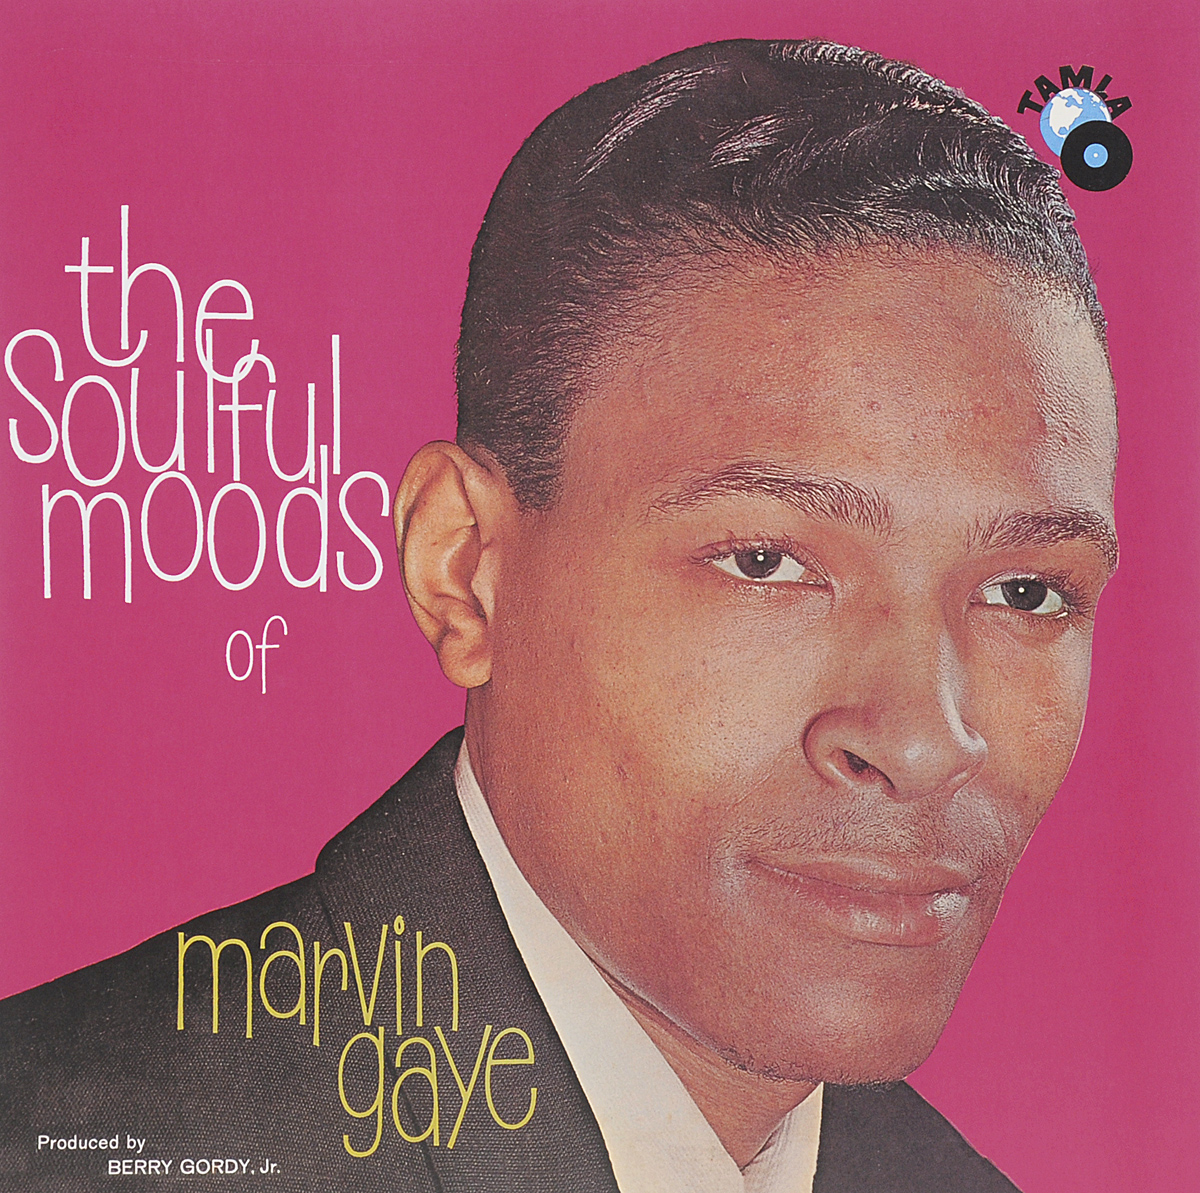 Marvin Gaye. The Soulful Moods Of Marvin Gaye (LP)